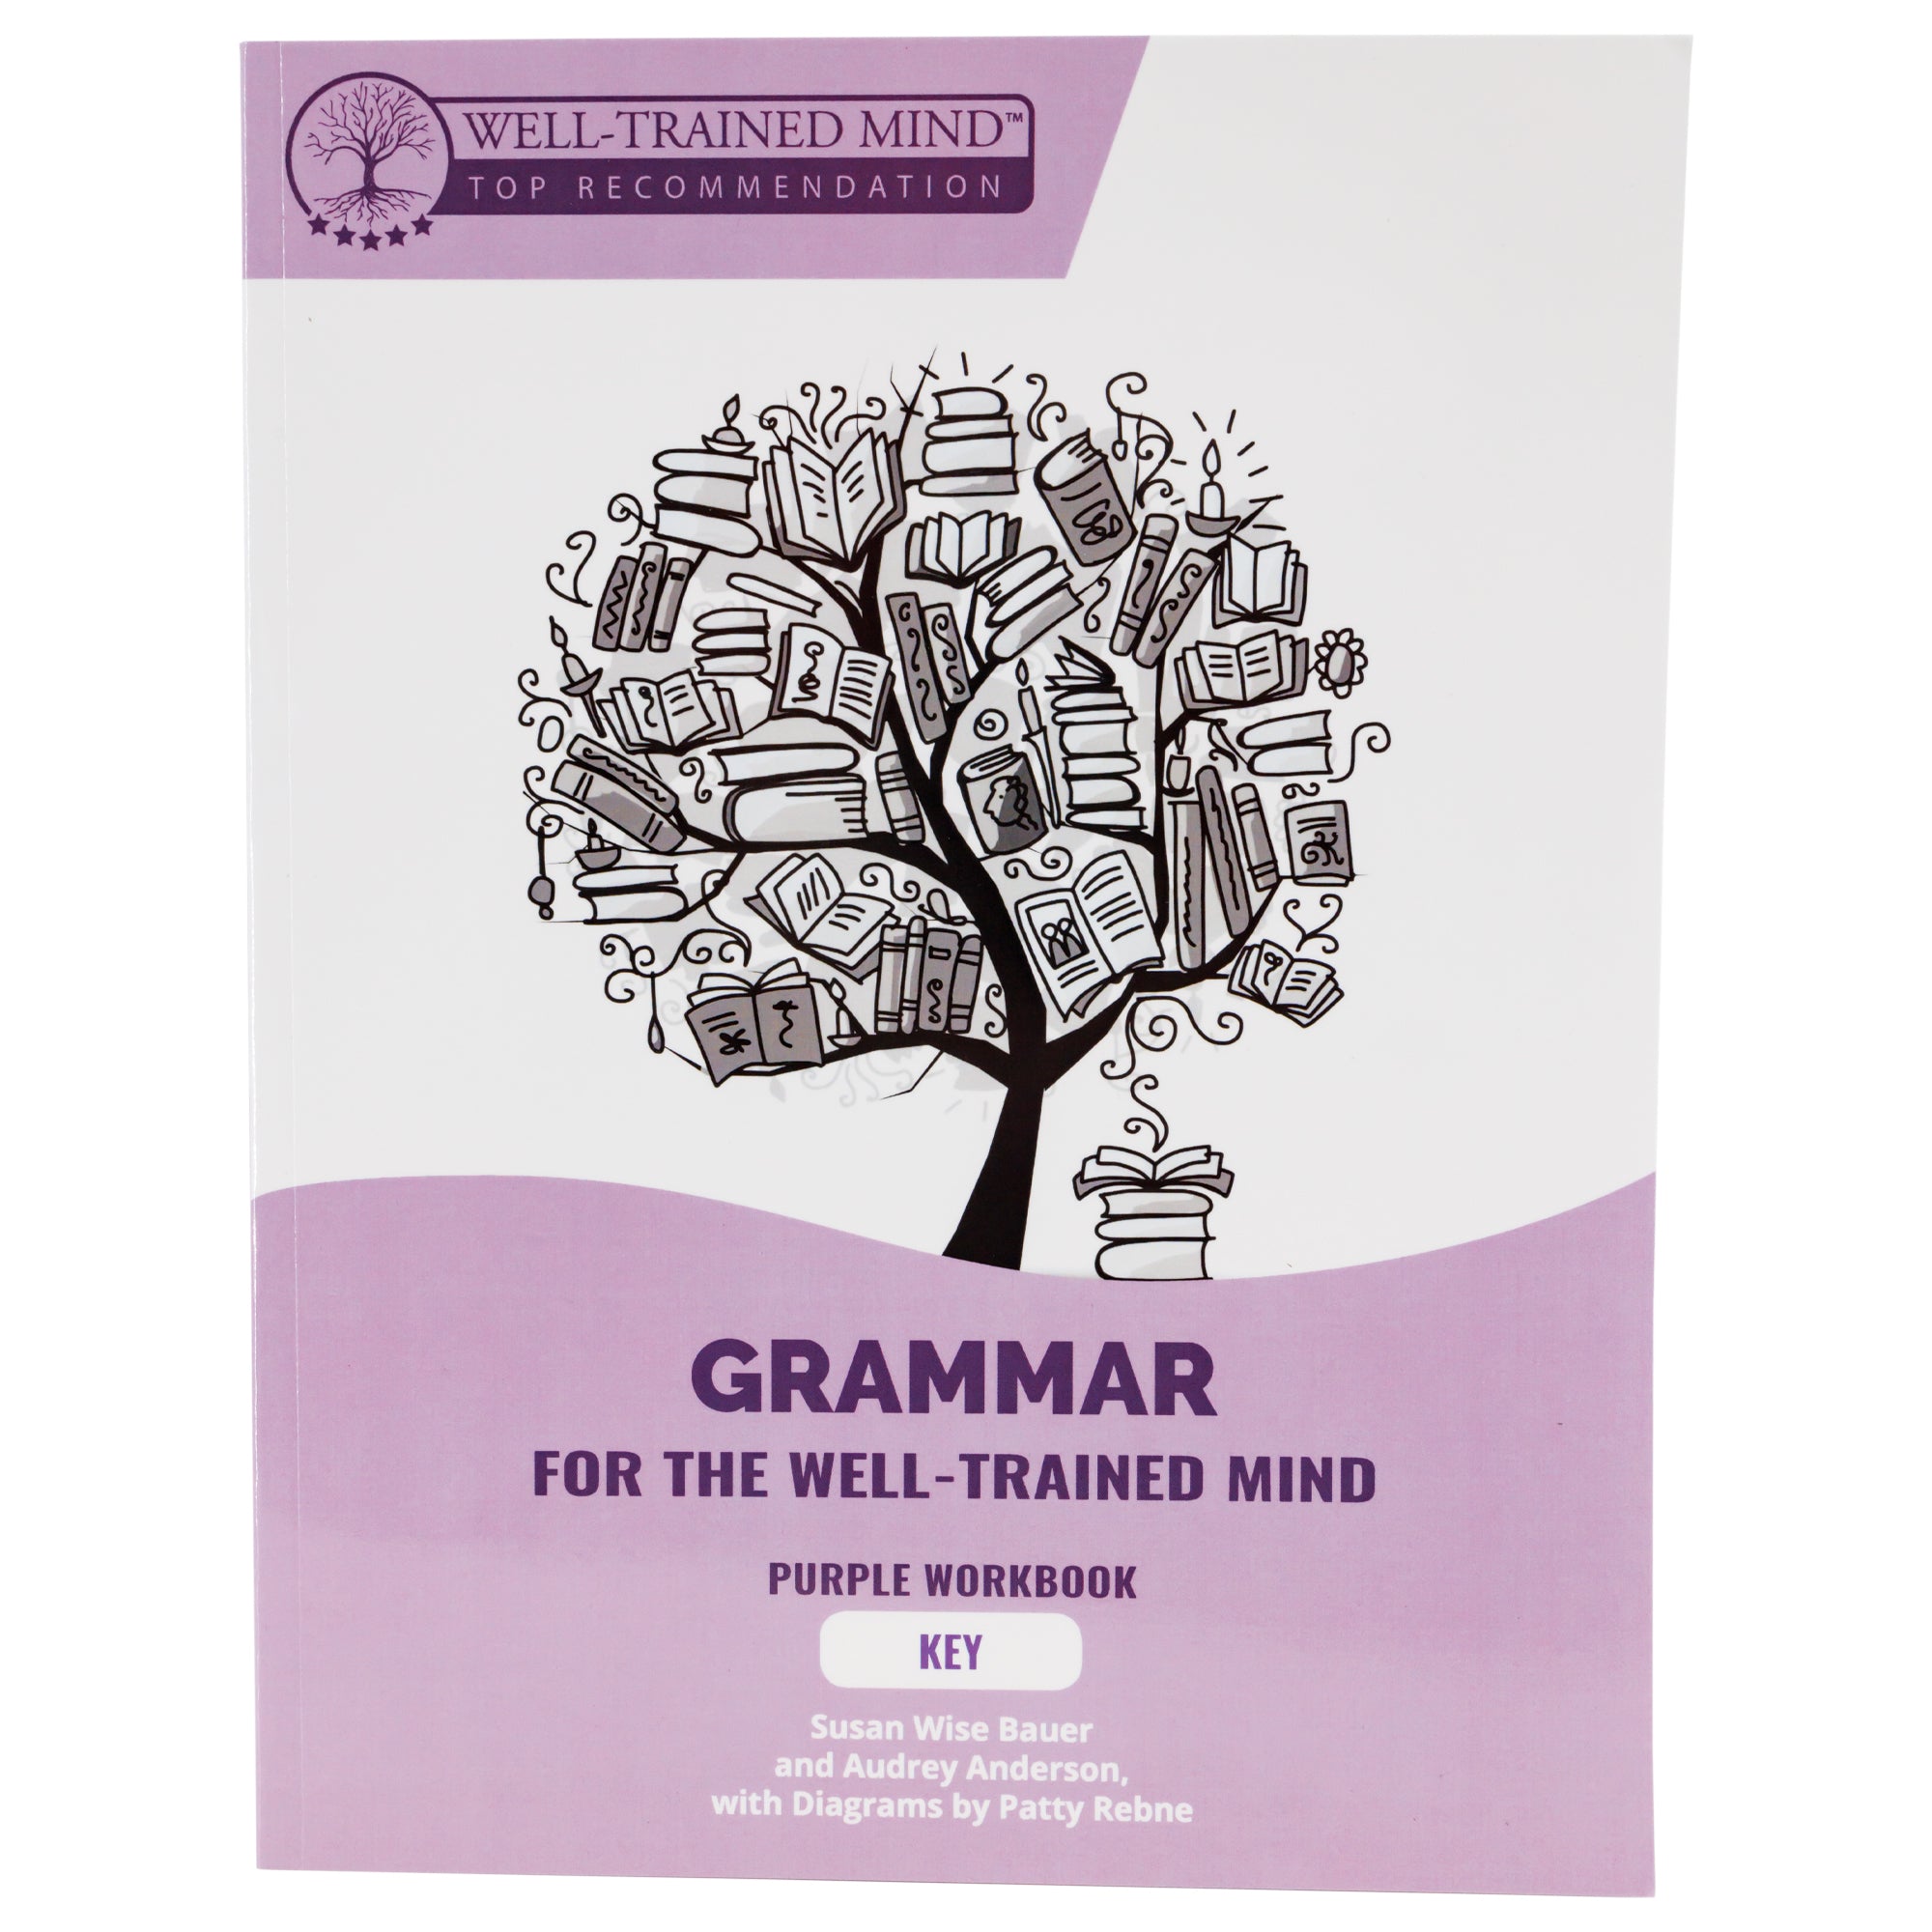 Grammar for the Well-Trained Mind light purple book cover. The cover has a white top and a purple bottom with a wave shape between the 2 colors. There is an illustration in the white section of a tree with books for leaves and a stack of books near the trunk. In the purple section at the bottom is purple text with the title and text reading “Purple Workbook” and “Key.”